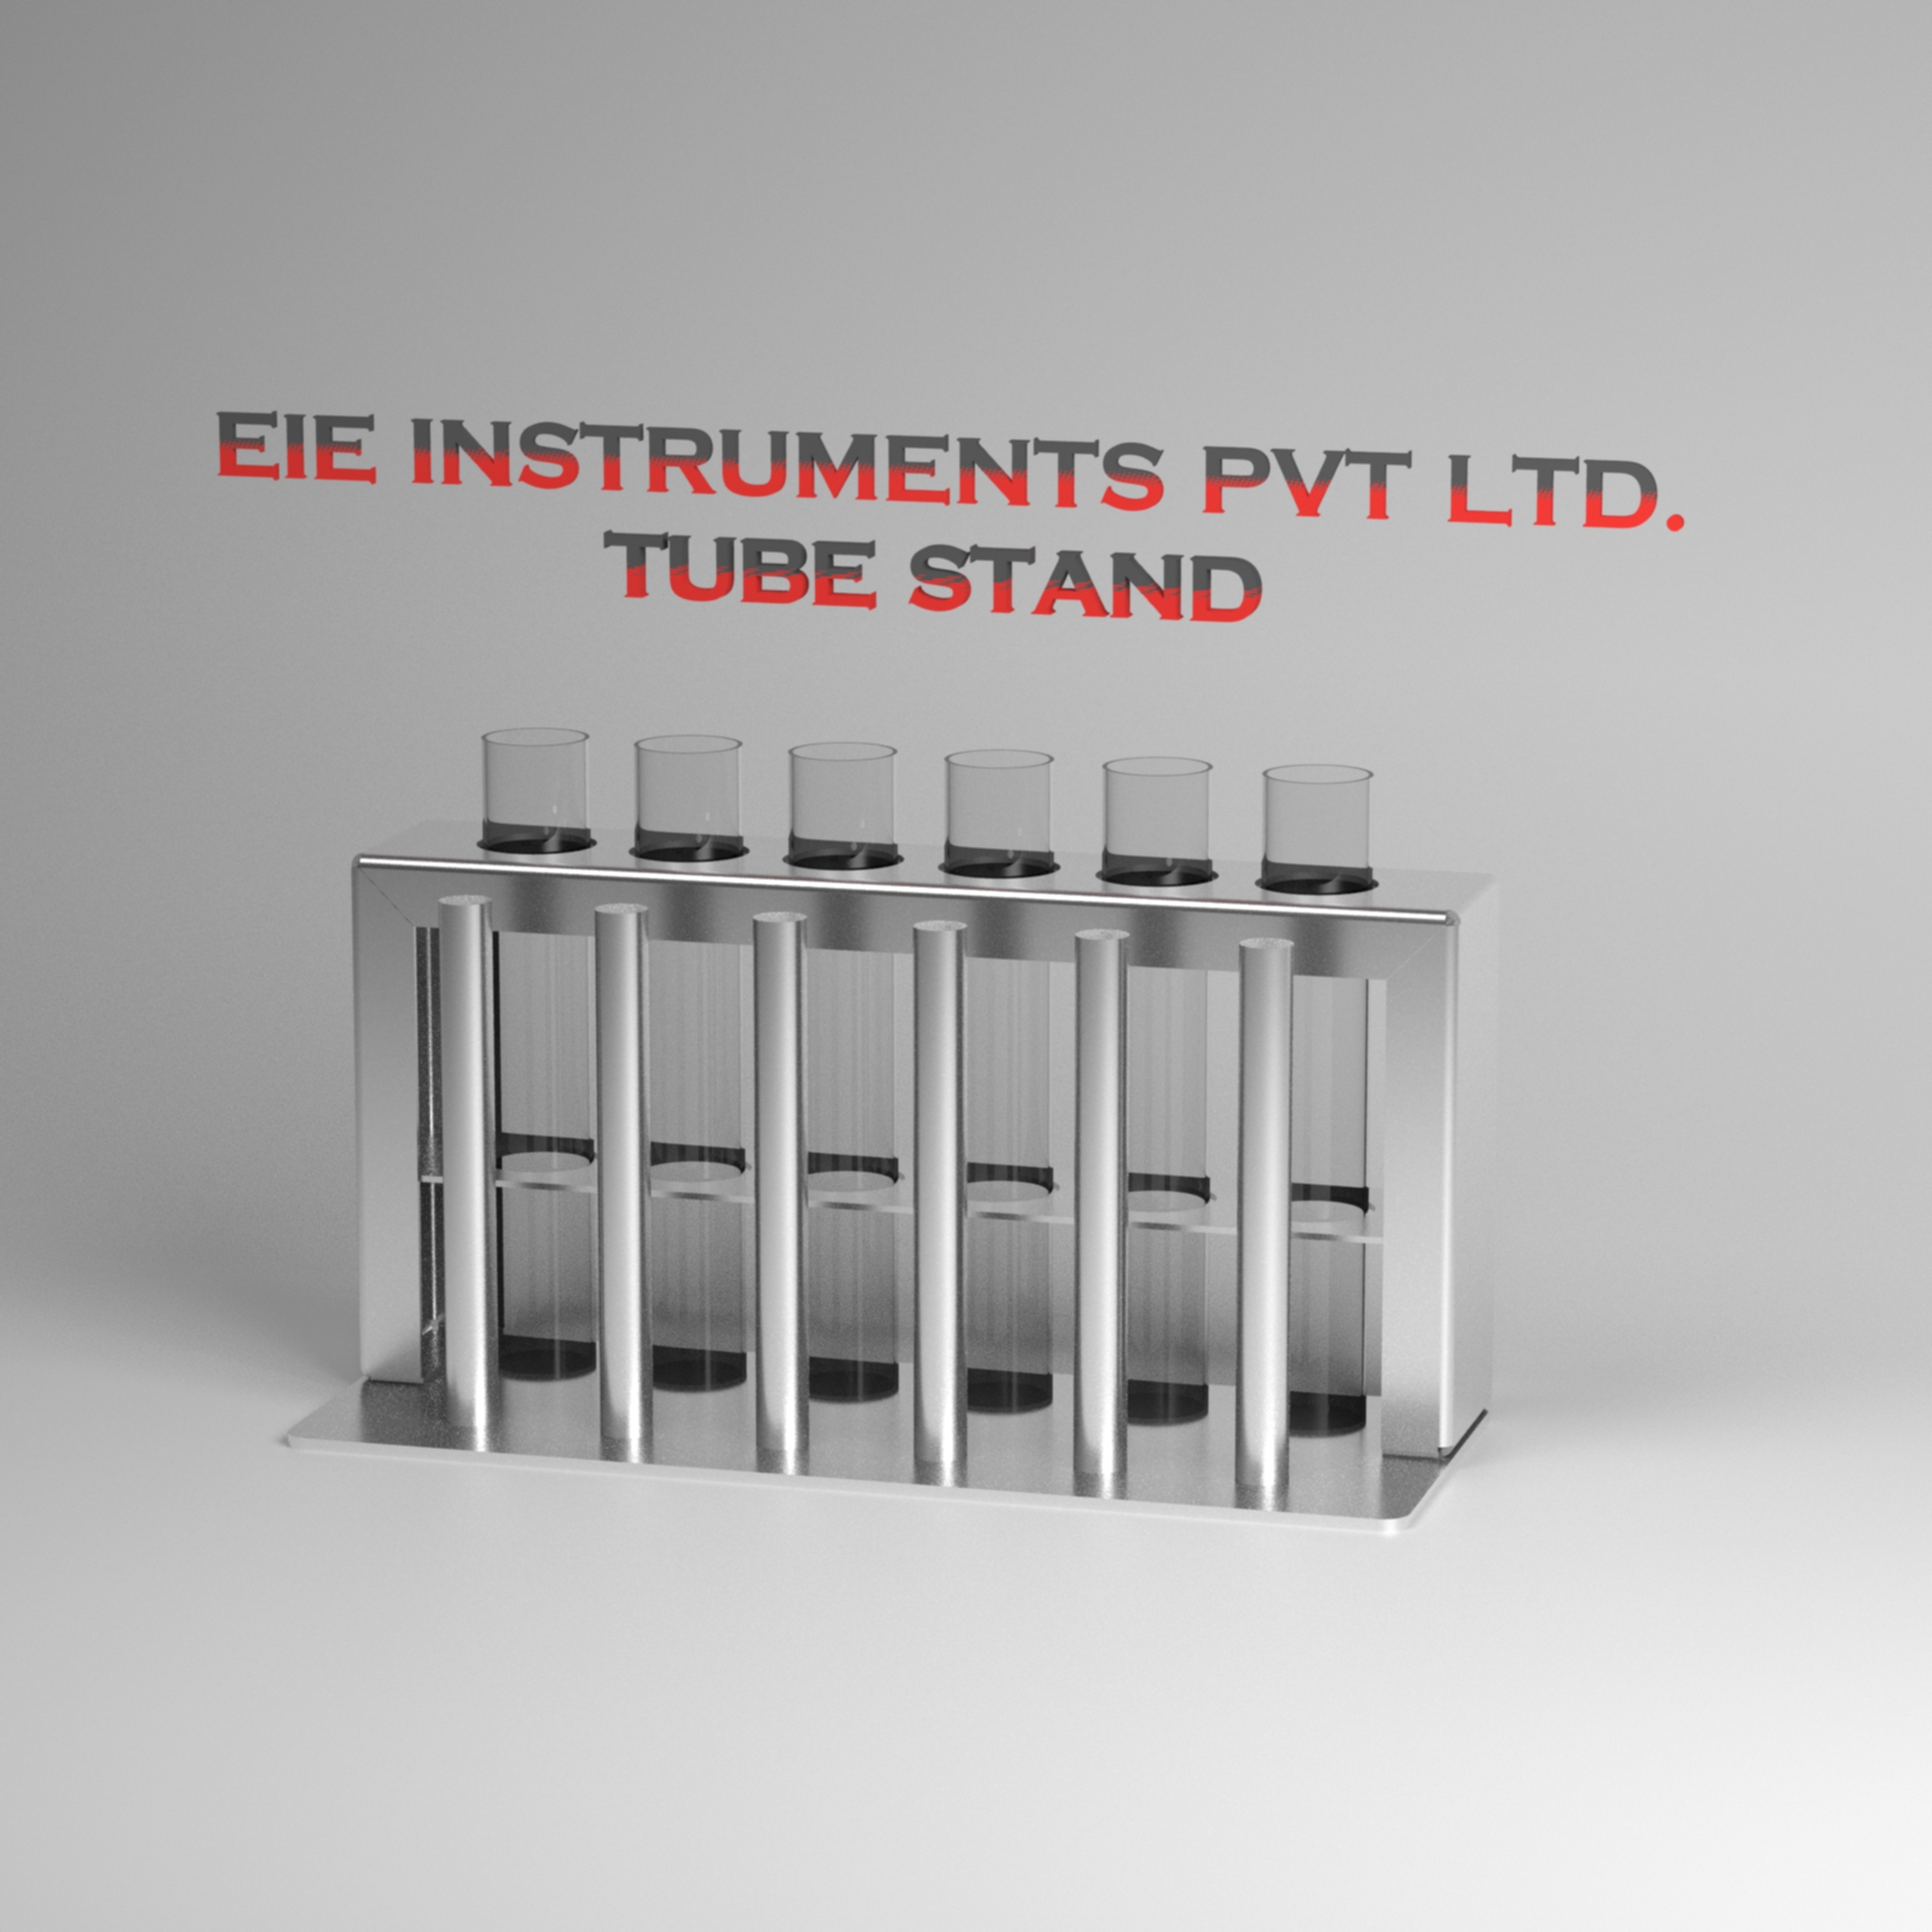 TEST TUBE STAND - S.S. - FOR 25 MM DIA X 150 MM HEIGHT TEST TUBE - FOR COPPER STRIP CORROSION TEST - ASTM D130